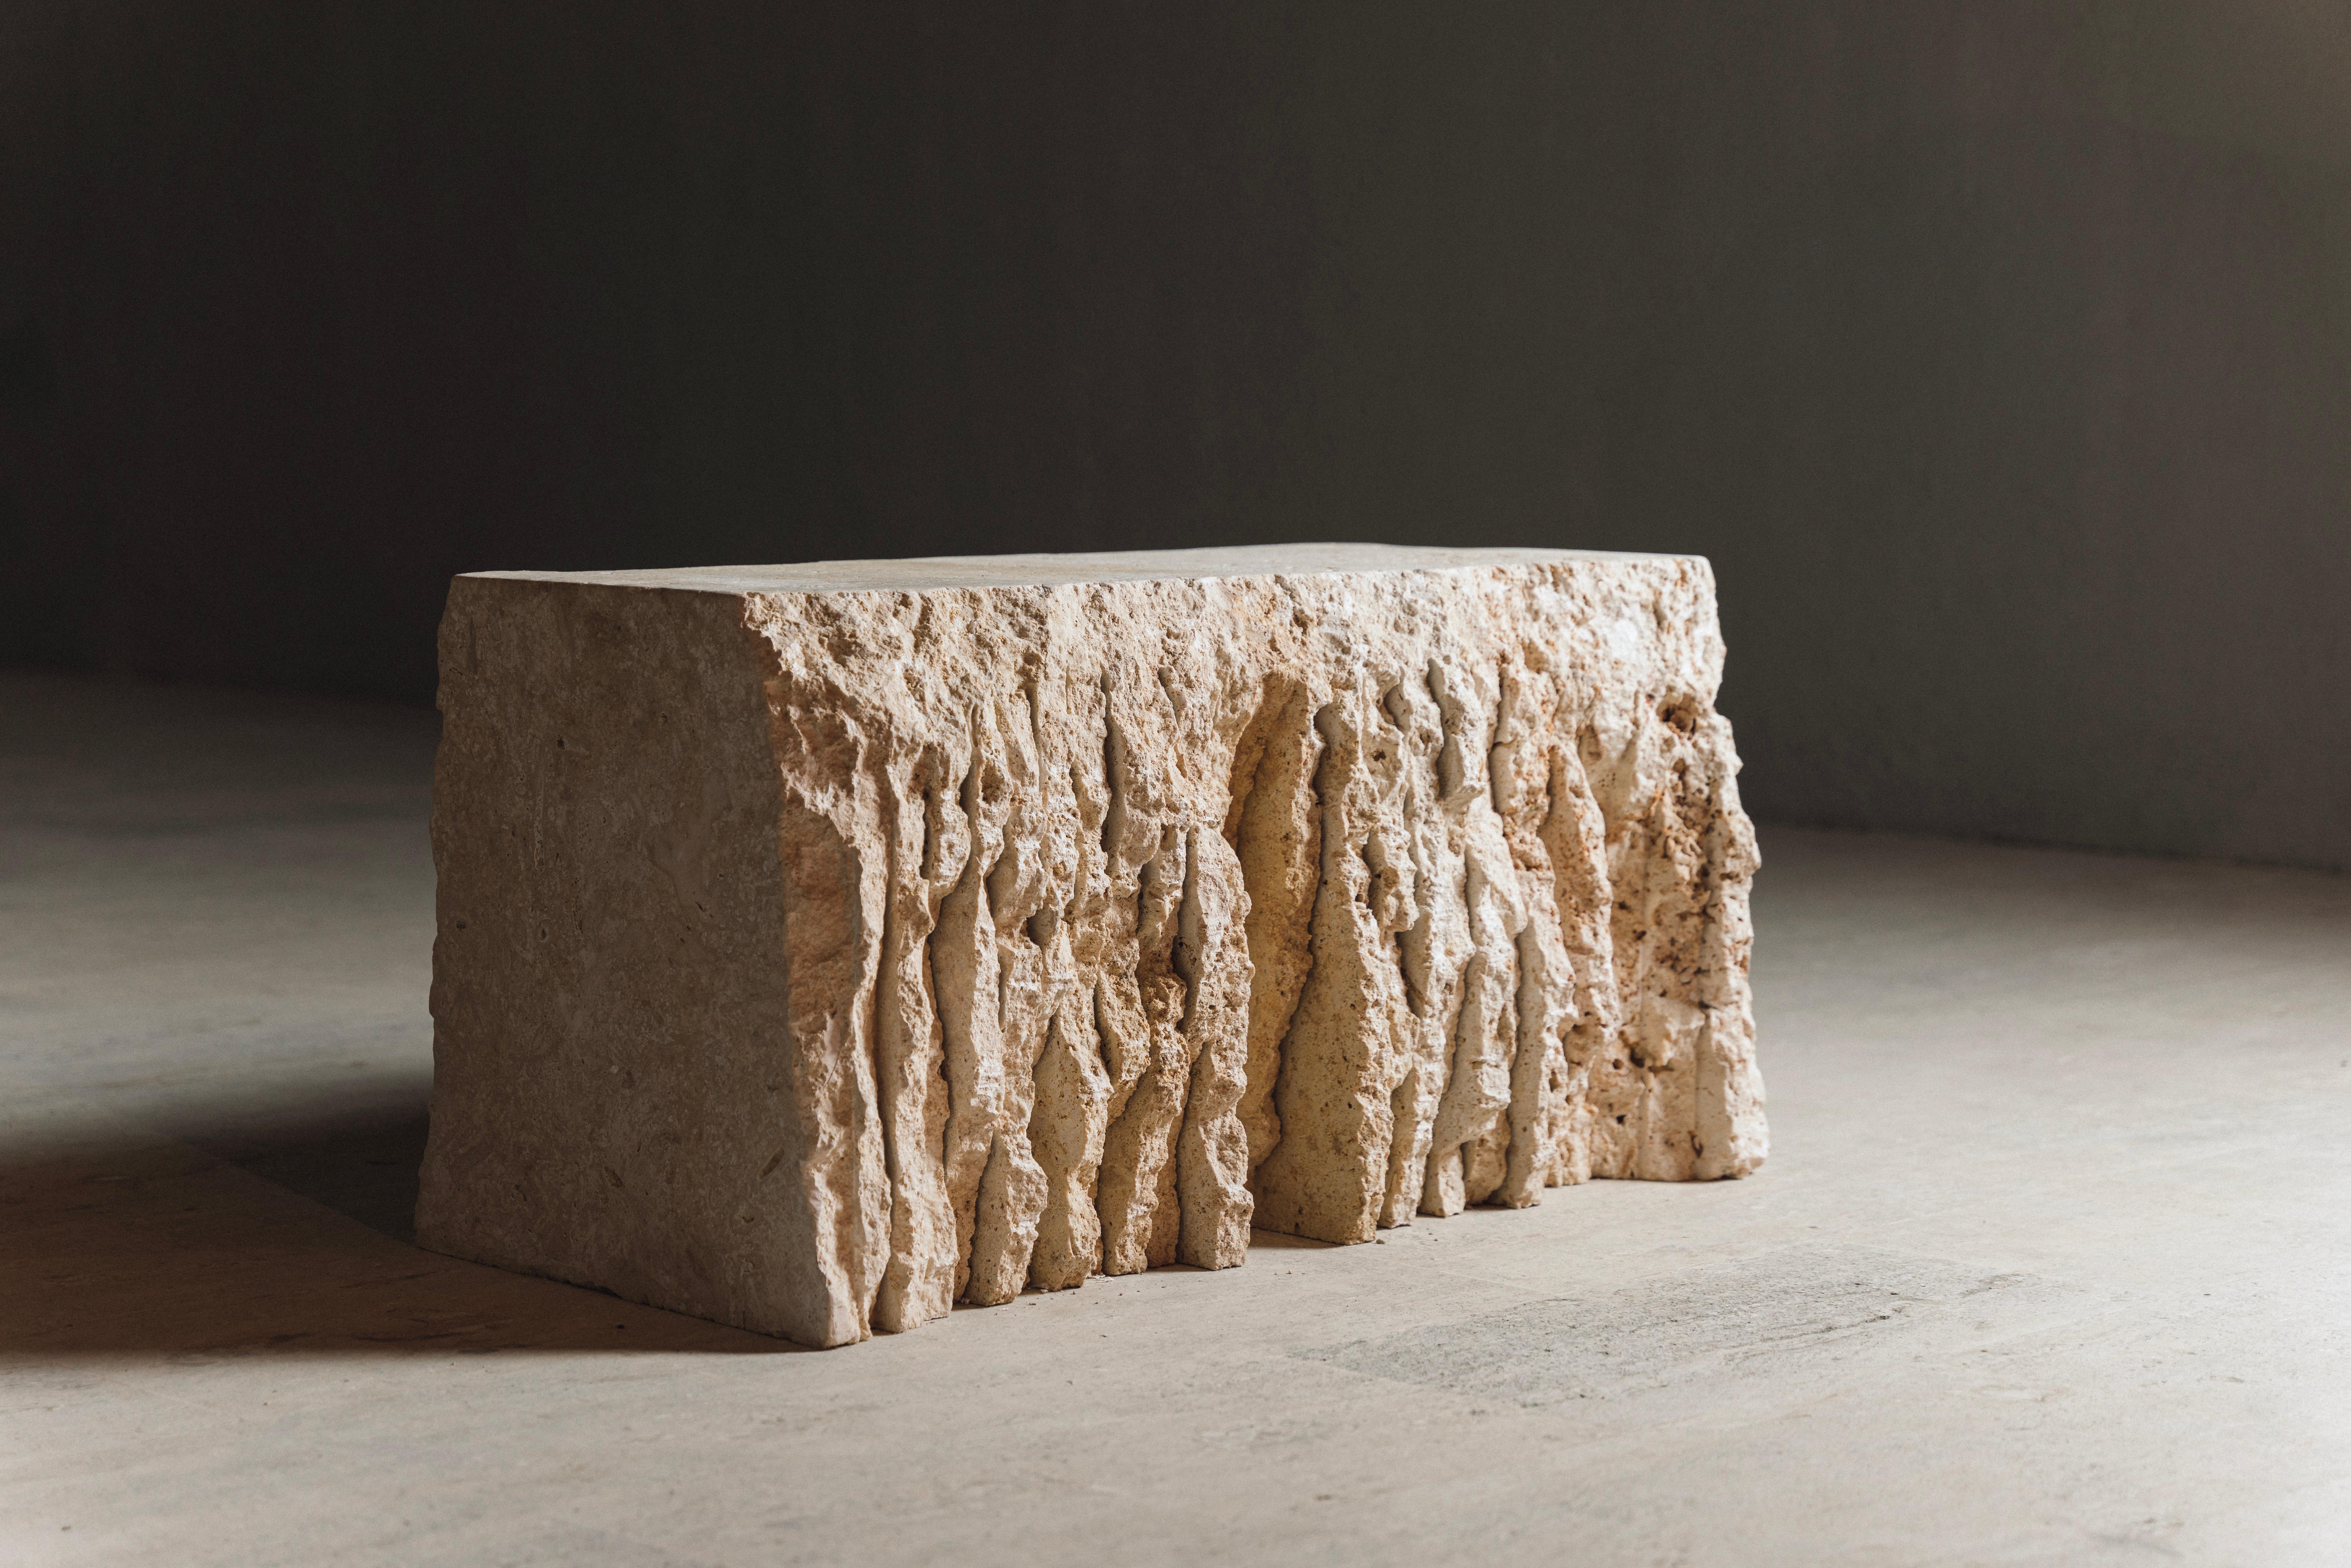 Fractus sculptural seating by Andres Monnier.
One of a Kind.
Dimensions: W 50 x L 90 x H 50 cm.
Materials: Coralina clasica.
Stone options available: Grey, black and white marble, natural and red travertine, volcanic, basalt, granite rock, onyx,